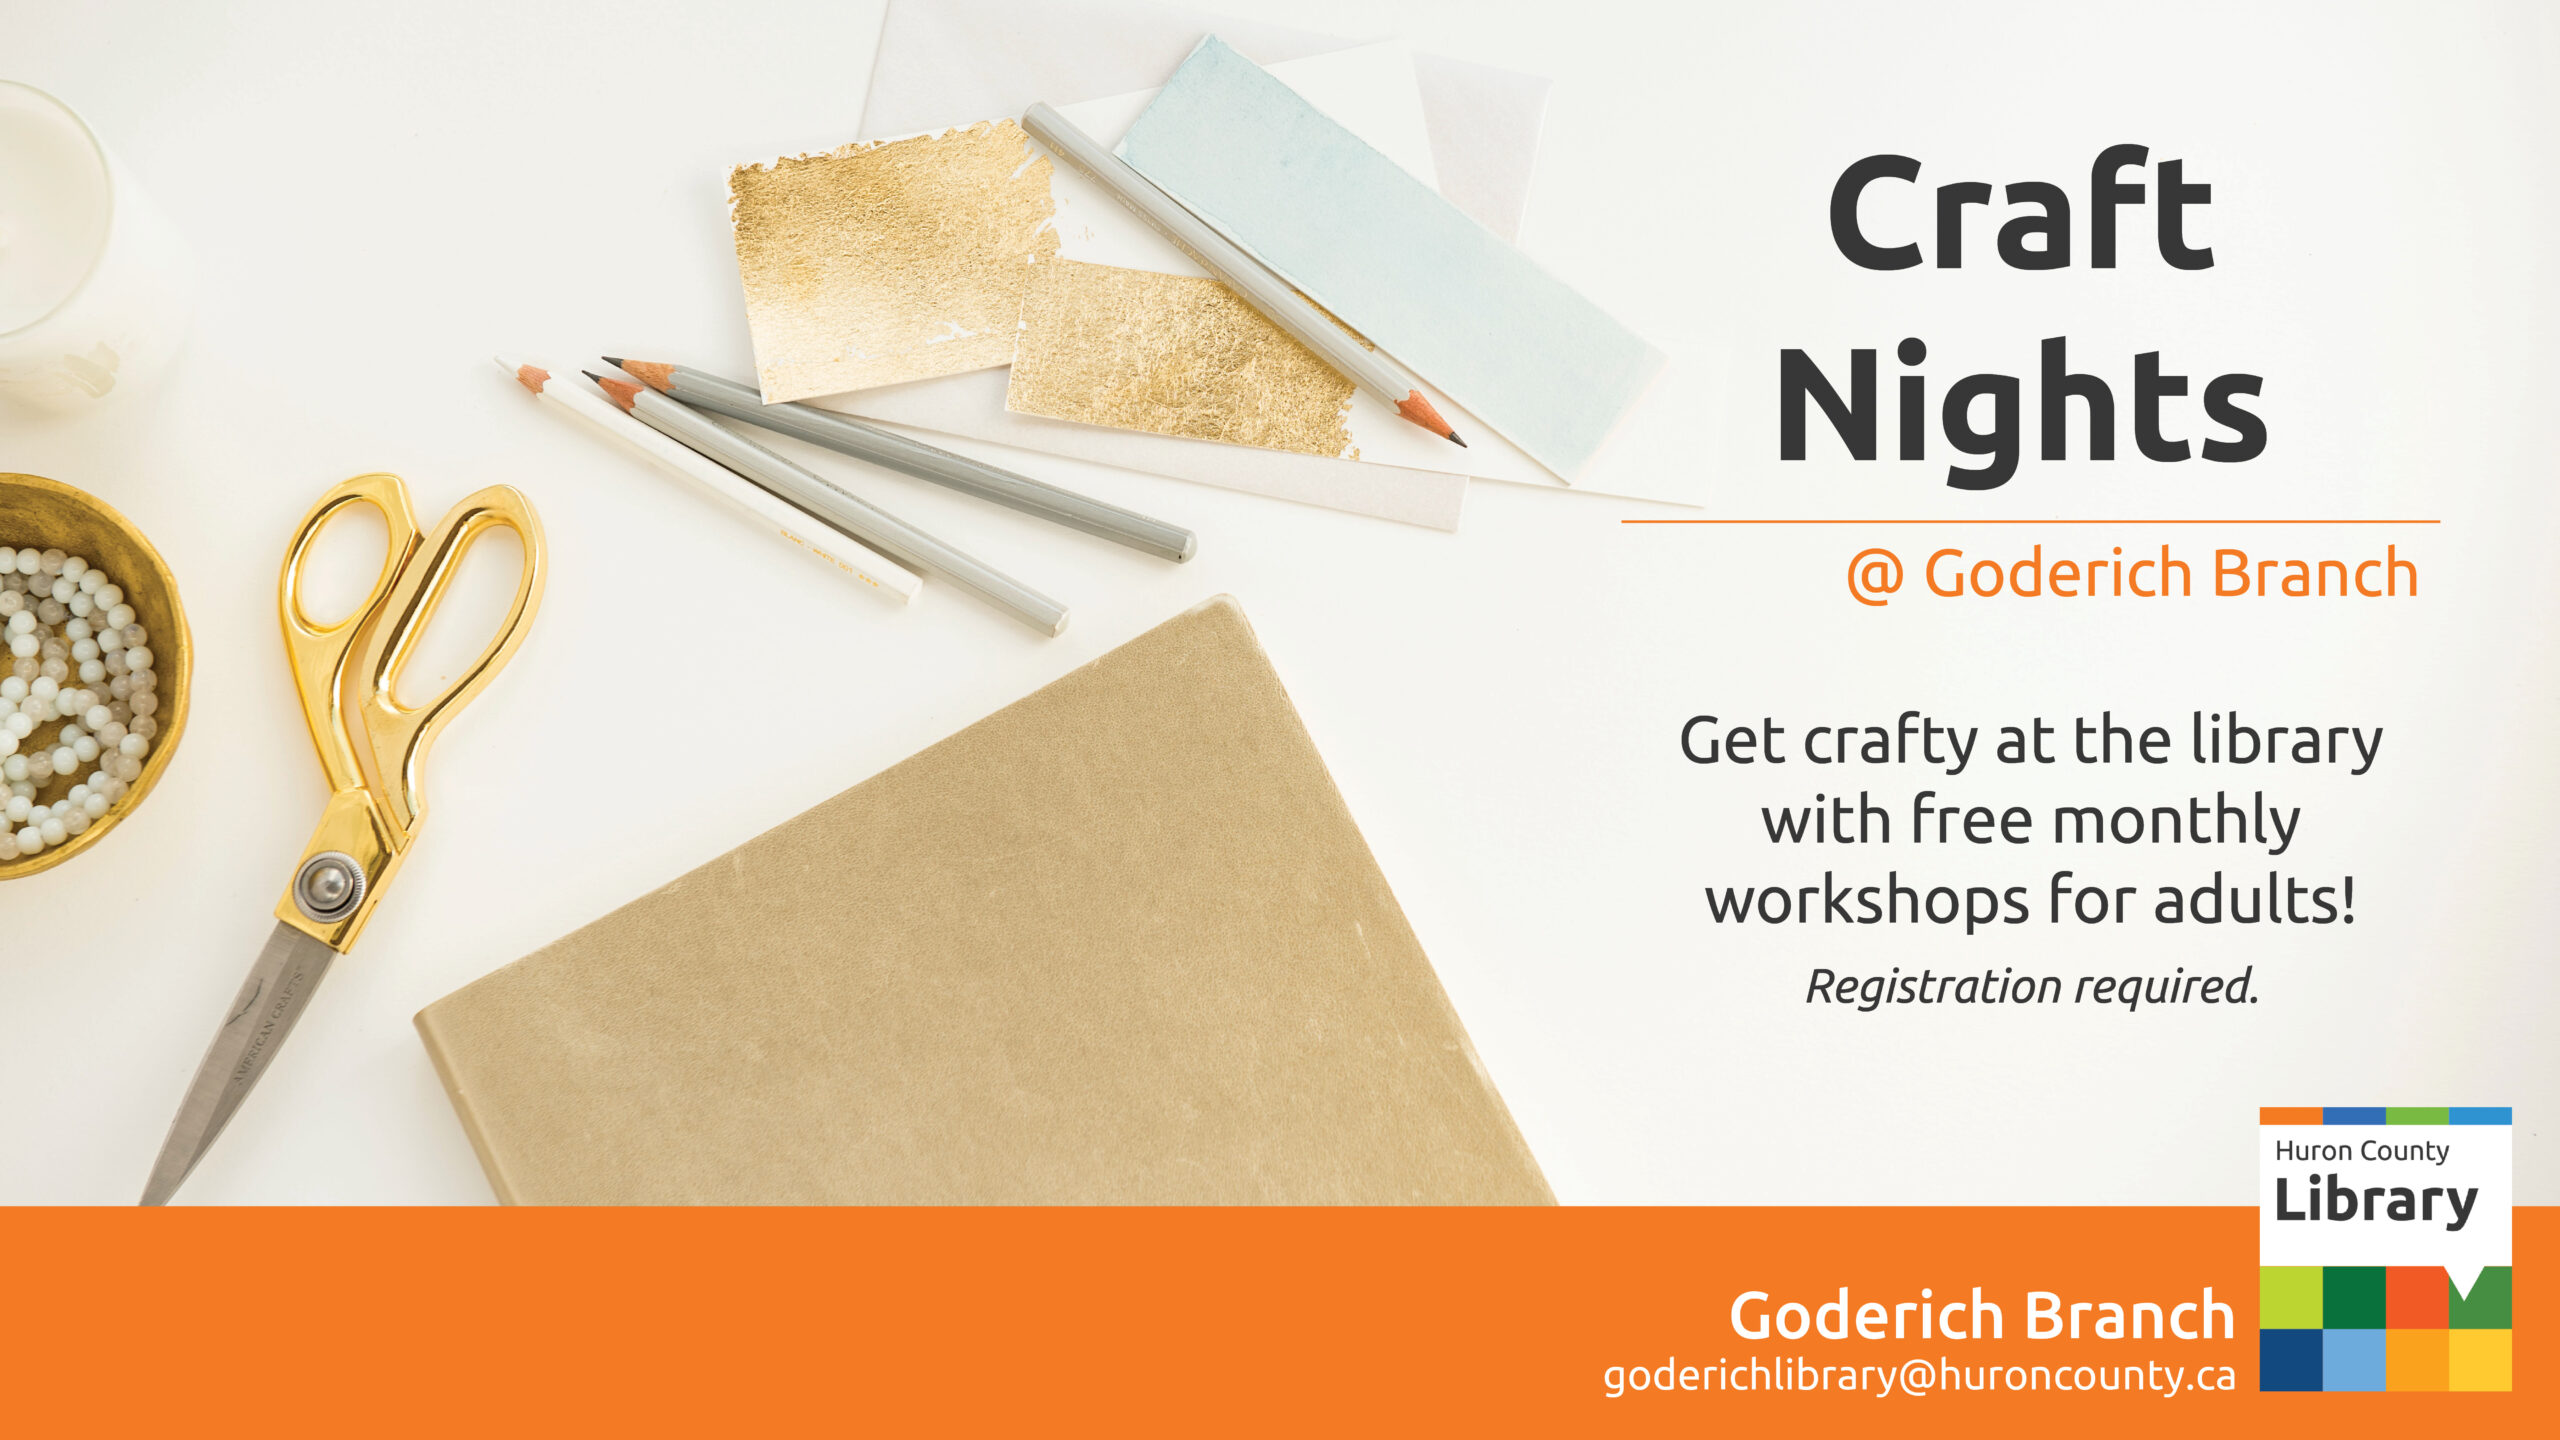 Photo of craft supplies with text promoting craft nights at Goderich